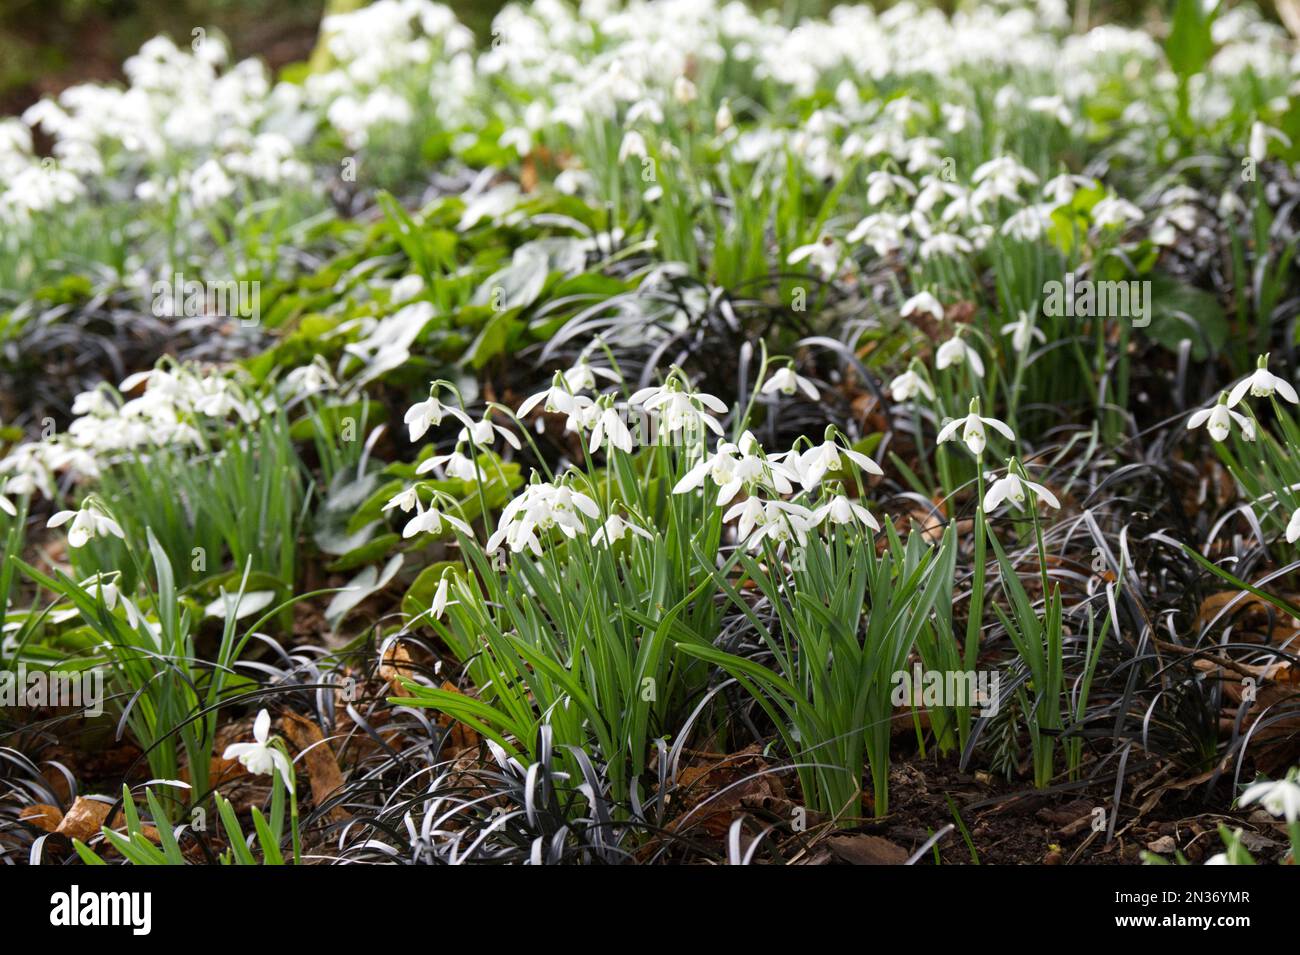 Snowdrops and ornamental black grass Ophiopogon planiscapus 'Nigrescens'  in a shaded woodland UK winter garden February Stock Photo